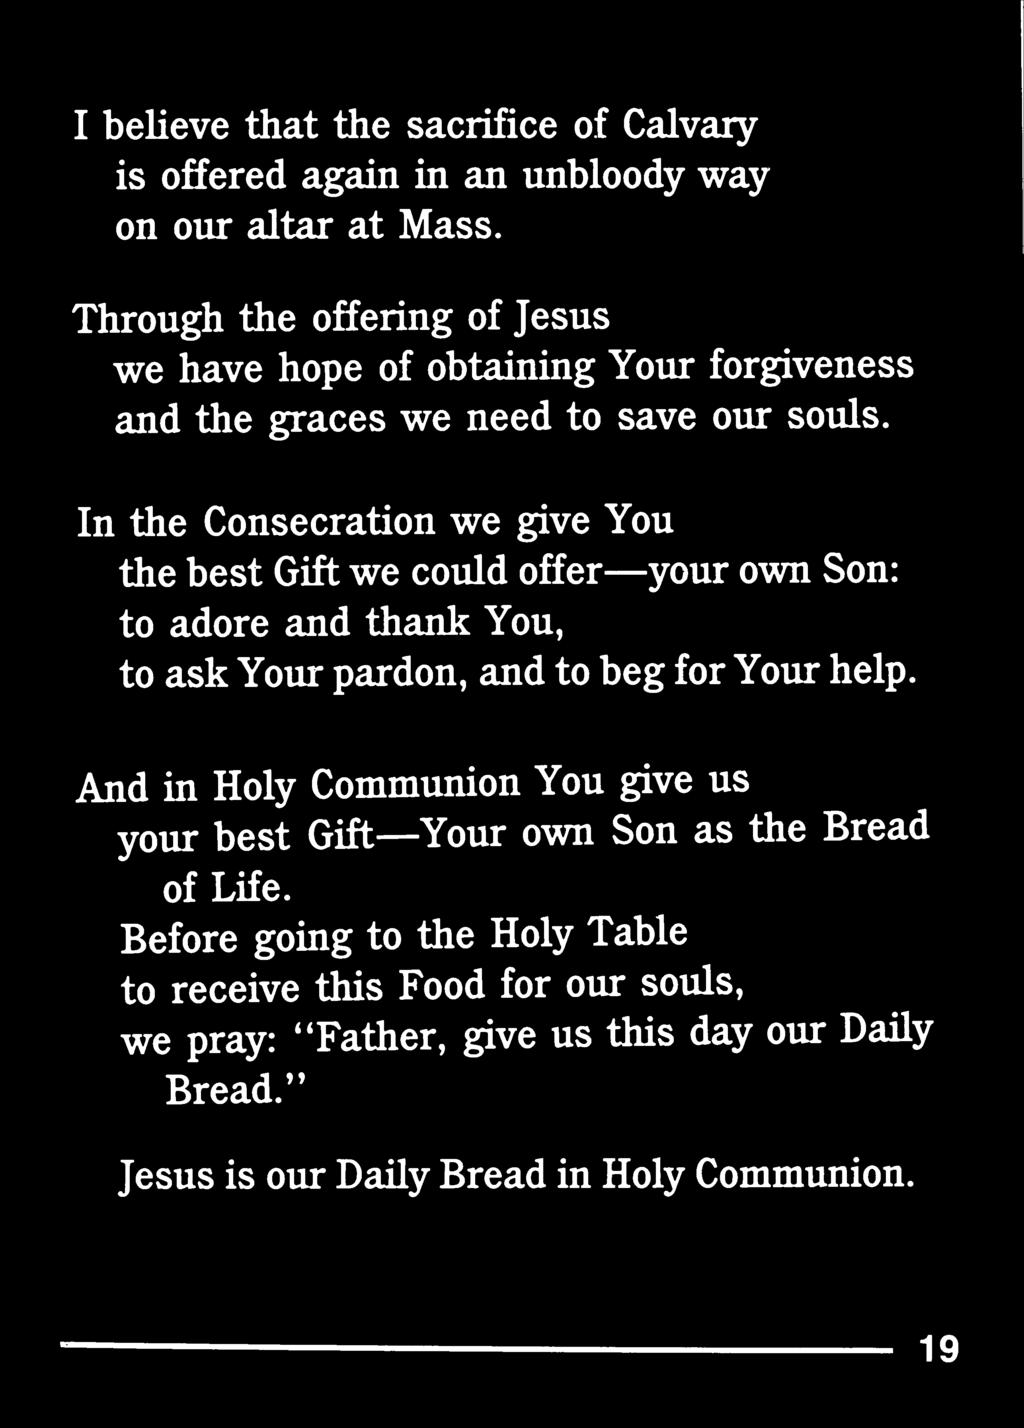 In the Consecration we give You the best Gift we could offer your own Son: to adore and thank You, to ask Your pardon, and to beg for Your help.